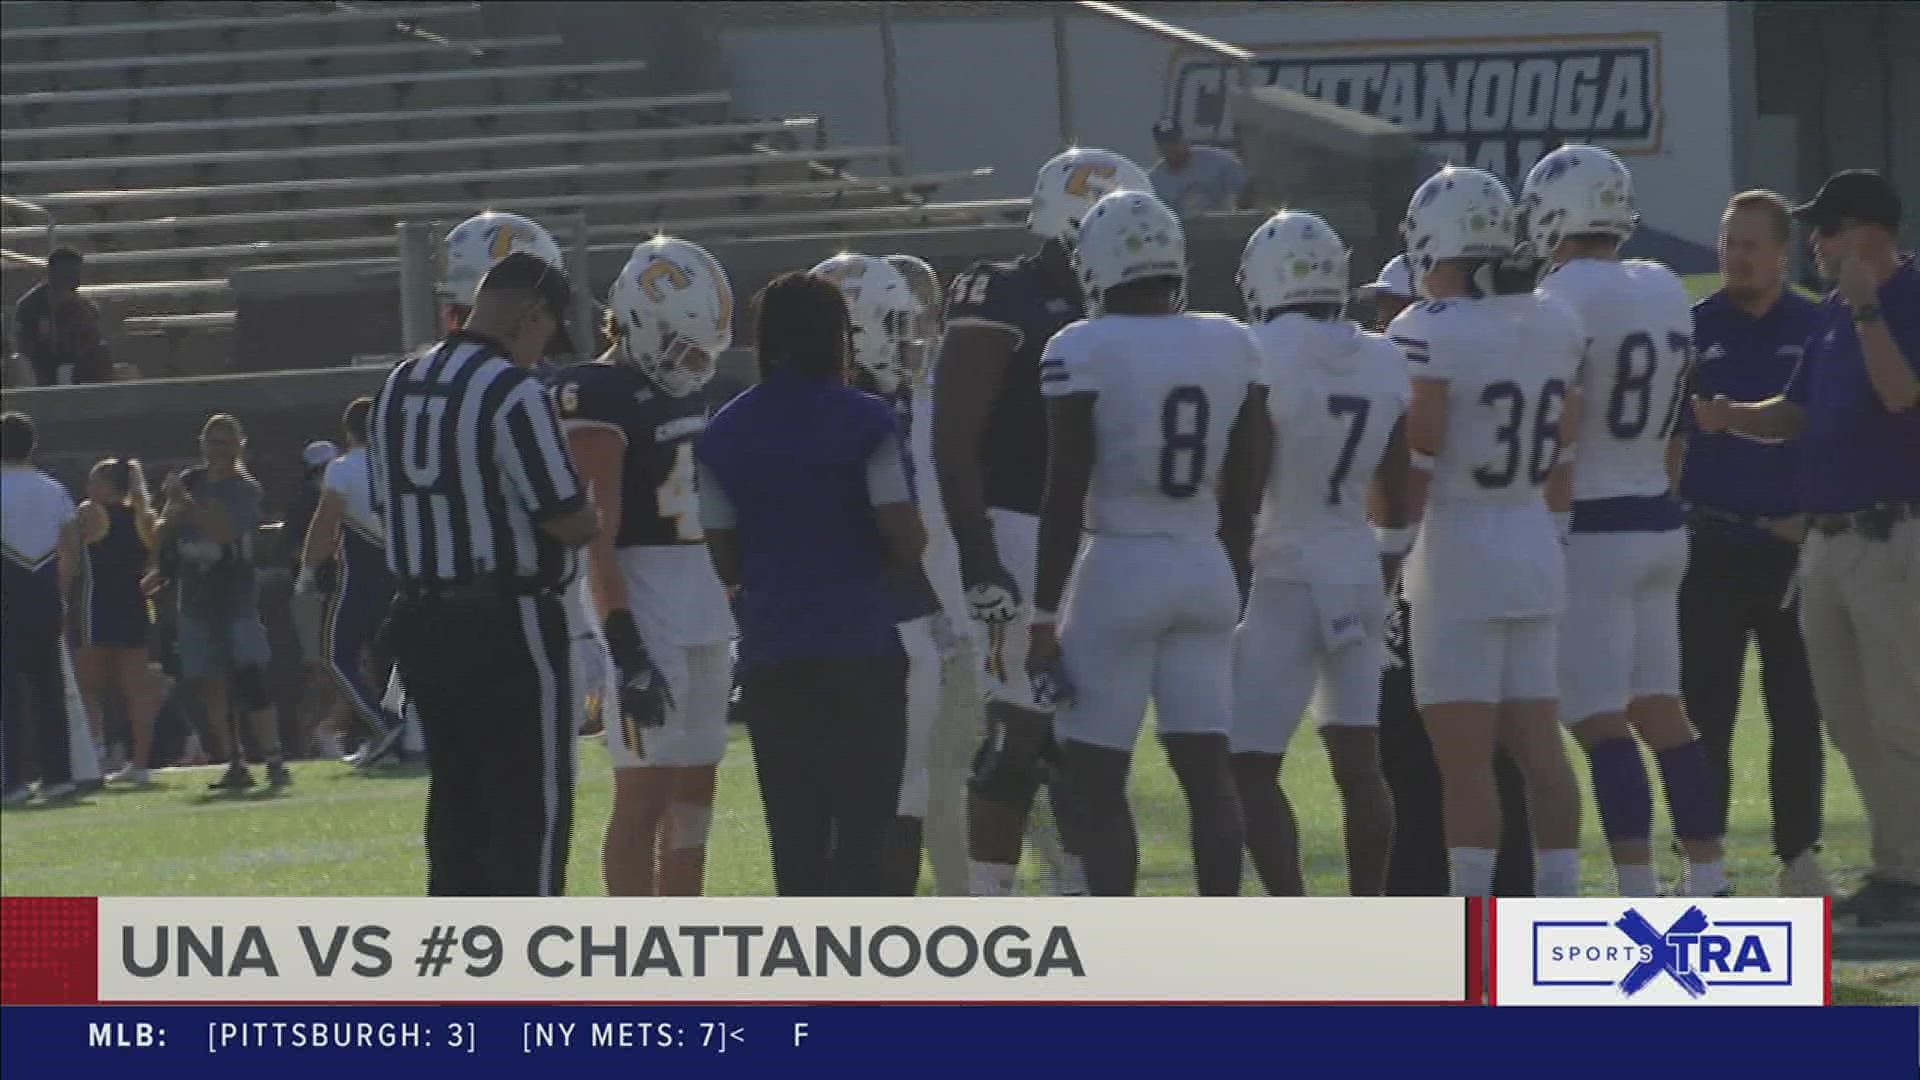 Preston Hutchinson threw for three touchdowns and ran for two more, leading Chattanooga to a 41-14 victory over UNA